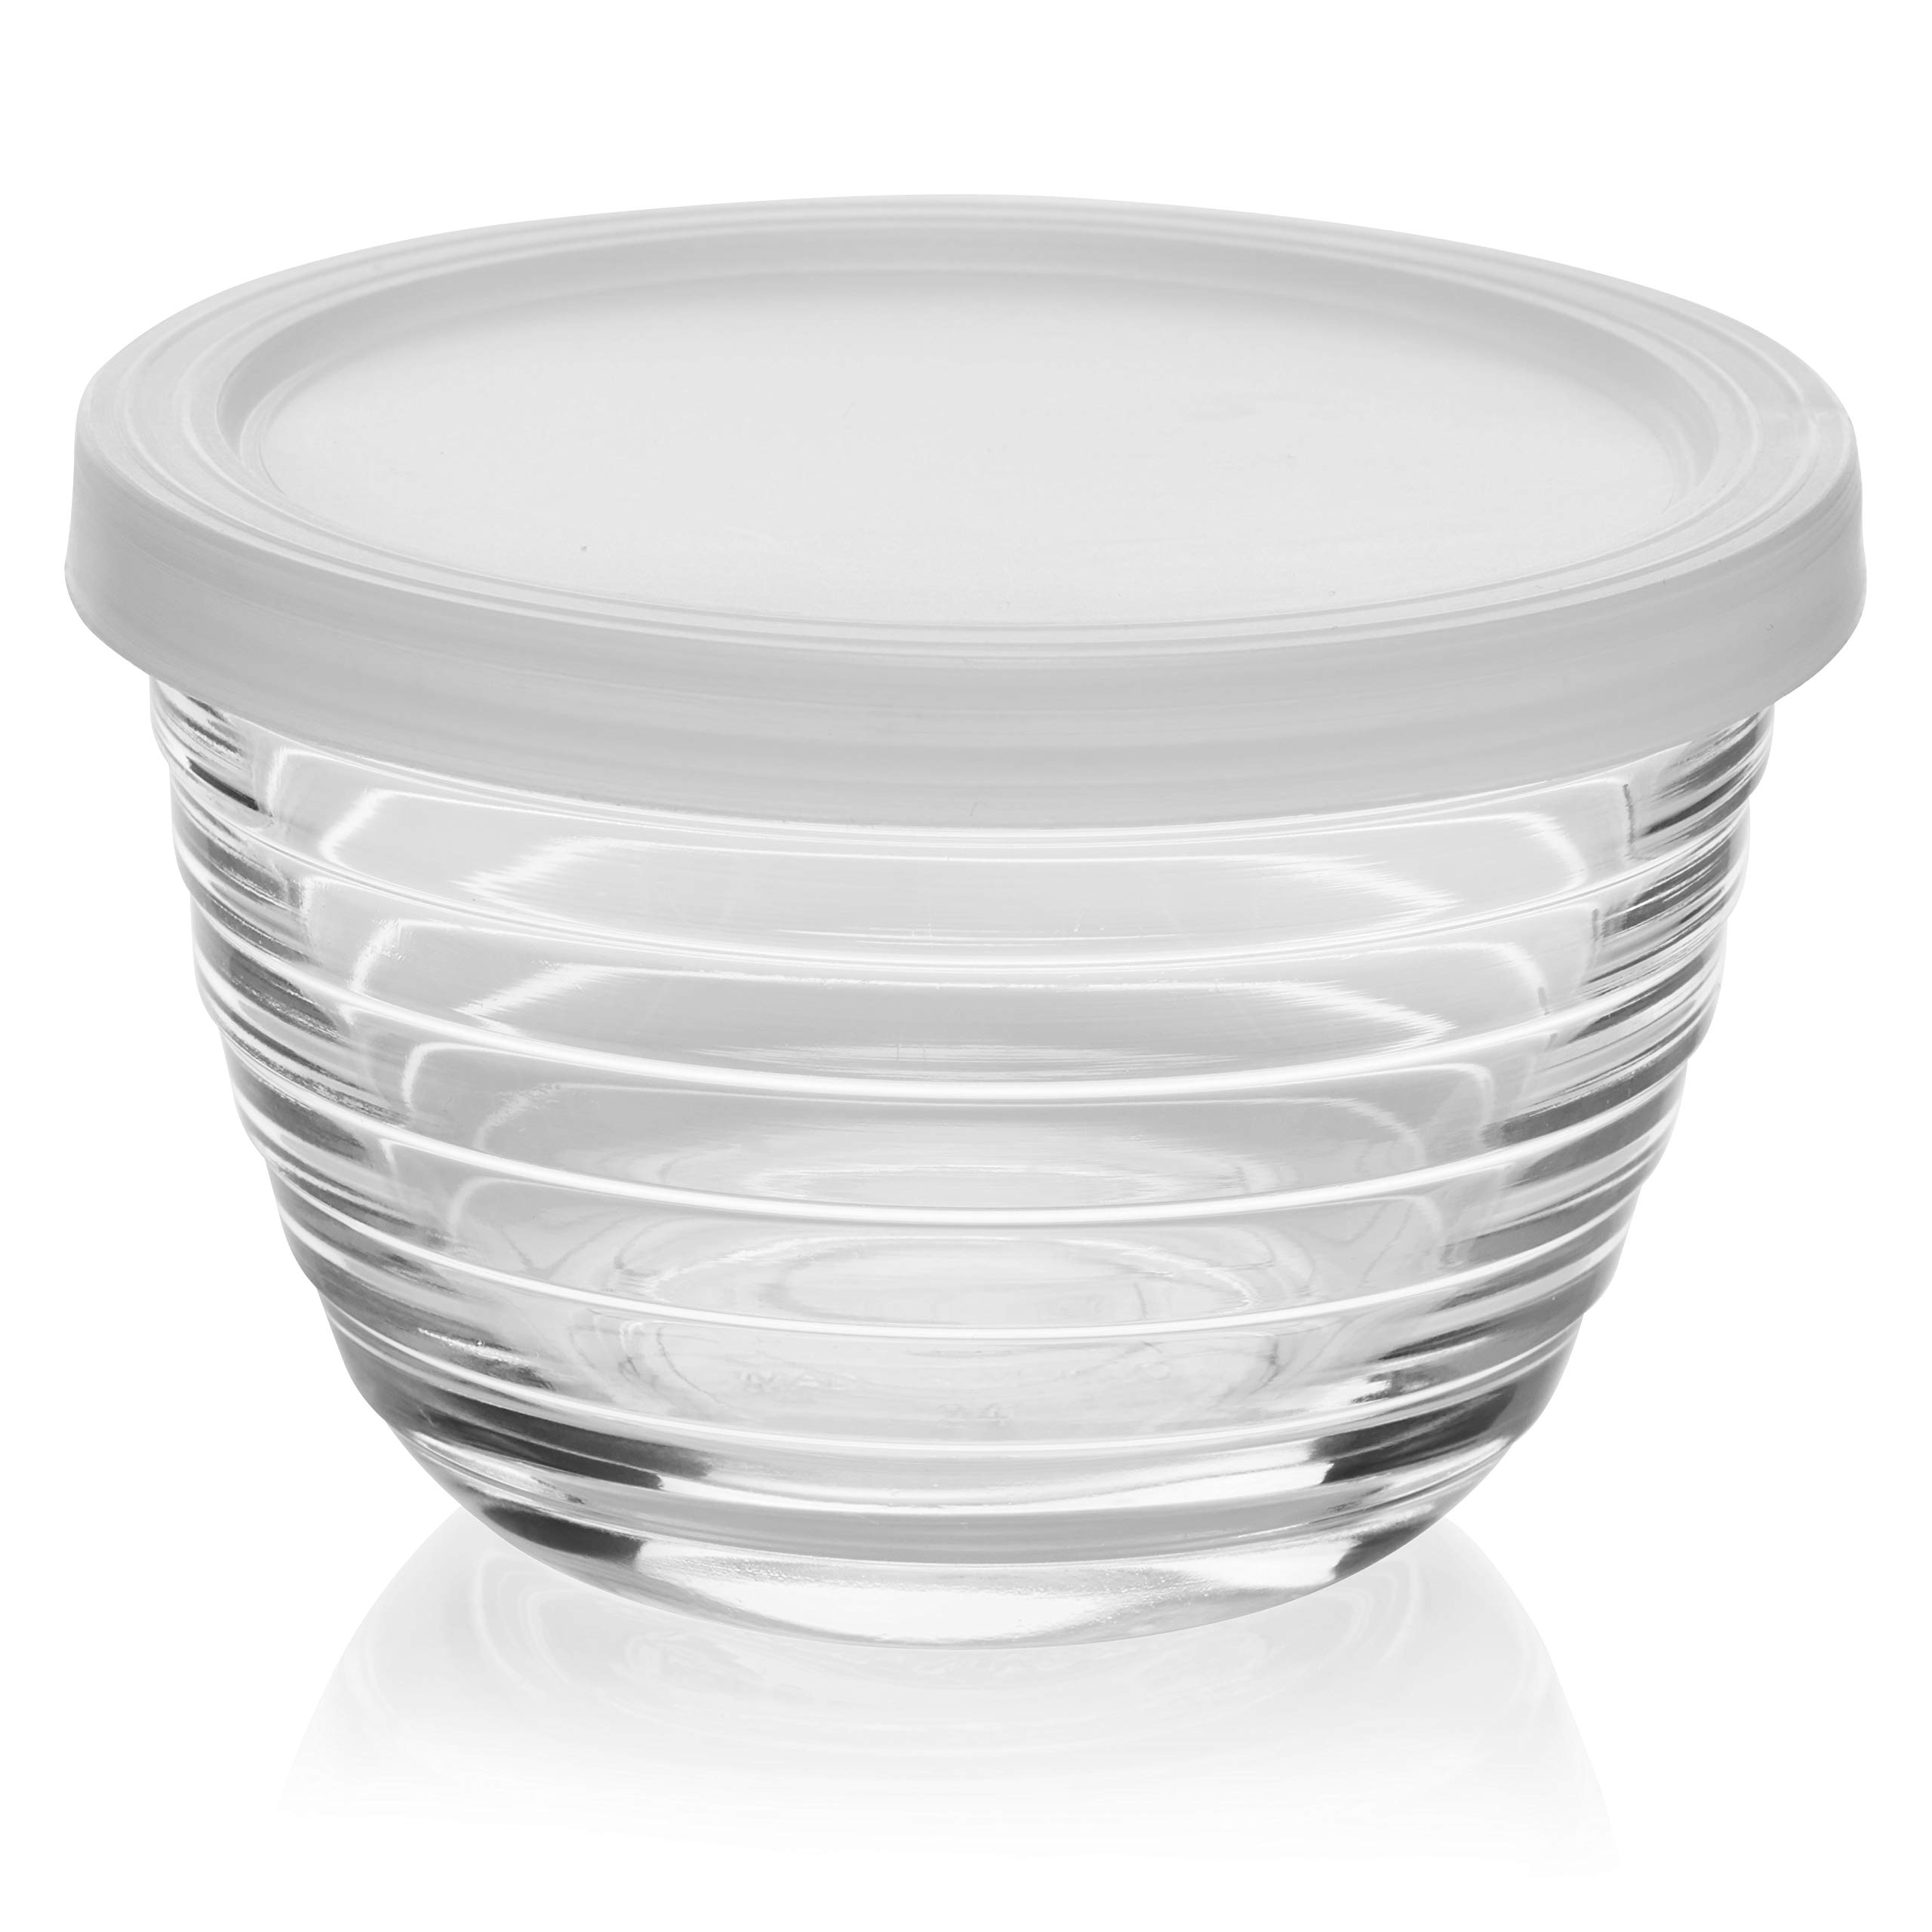 Libbey Small Glass Bowls with Lids, 6.25-ounce, Clear - Frustration Free Packaging, Set of 8